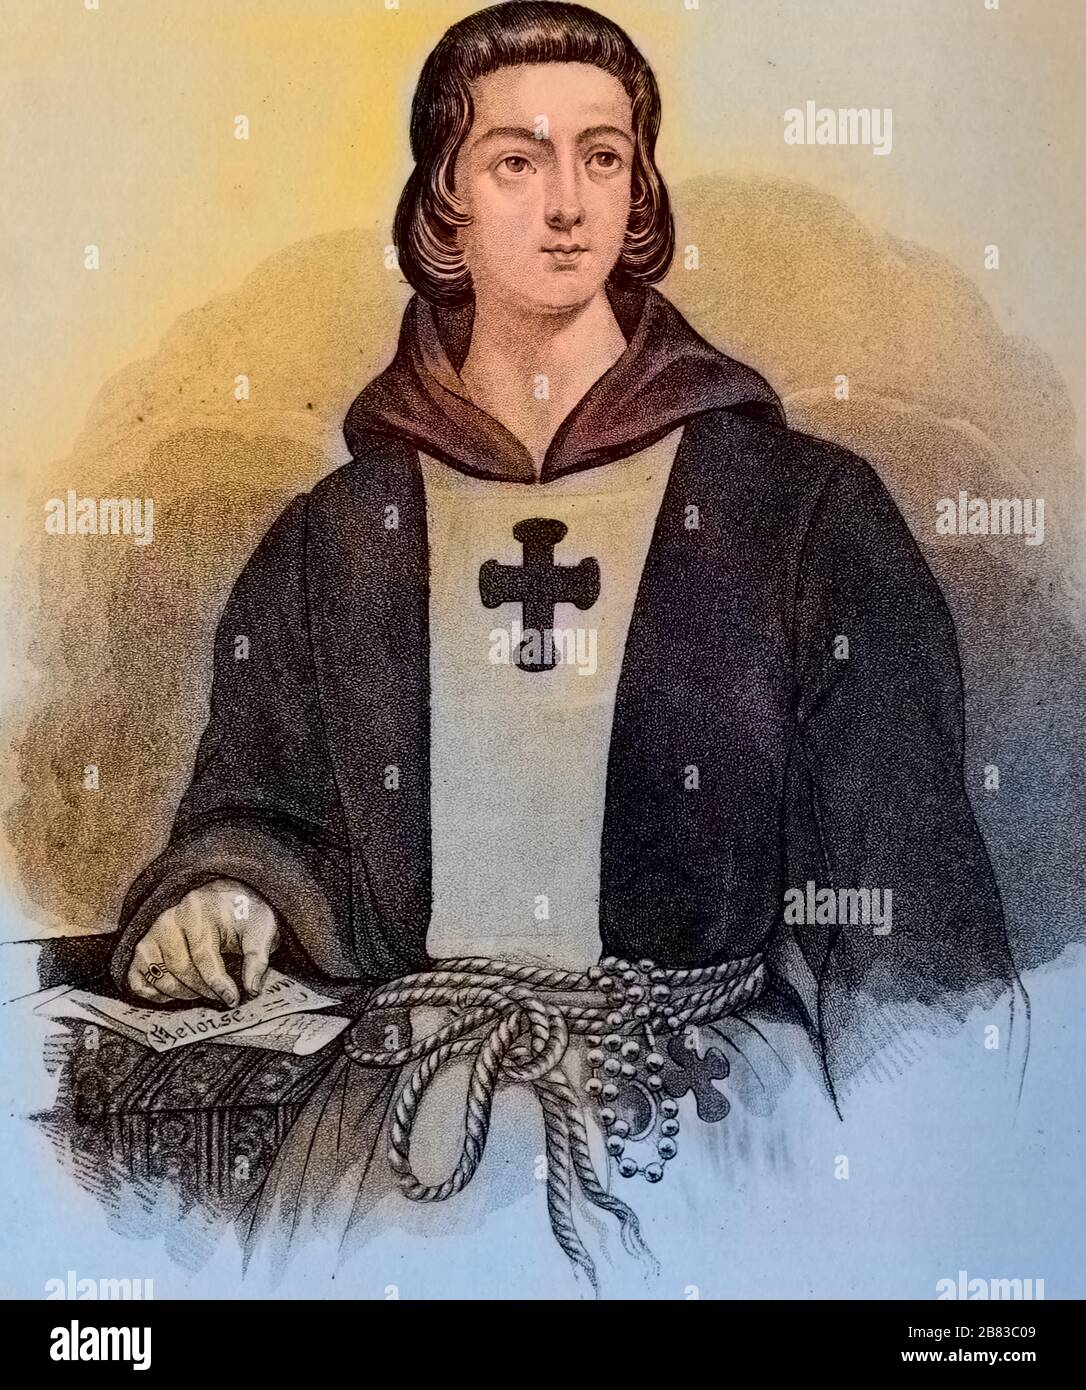 Engraved portrait of Peter Abelard, a French philosopher, and theologian, best known for his love affair with Heloise d'Argenteuil, from the book 'The World of fashion and continental feuilletons' published by John Bell, 2014. Courtesy Internet Archive. Note: Image has been digitally colorized using a modern process. Colors may not be period-accurate. () Stock Photo